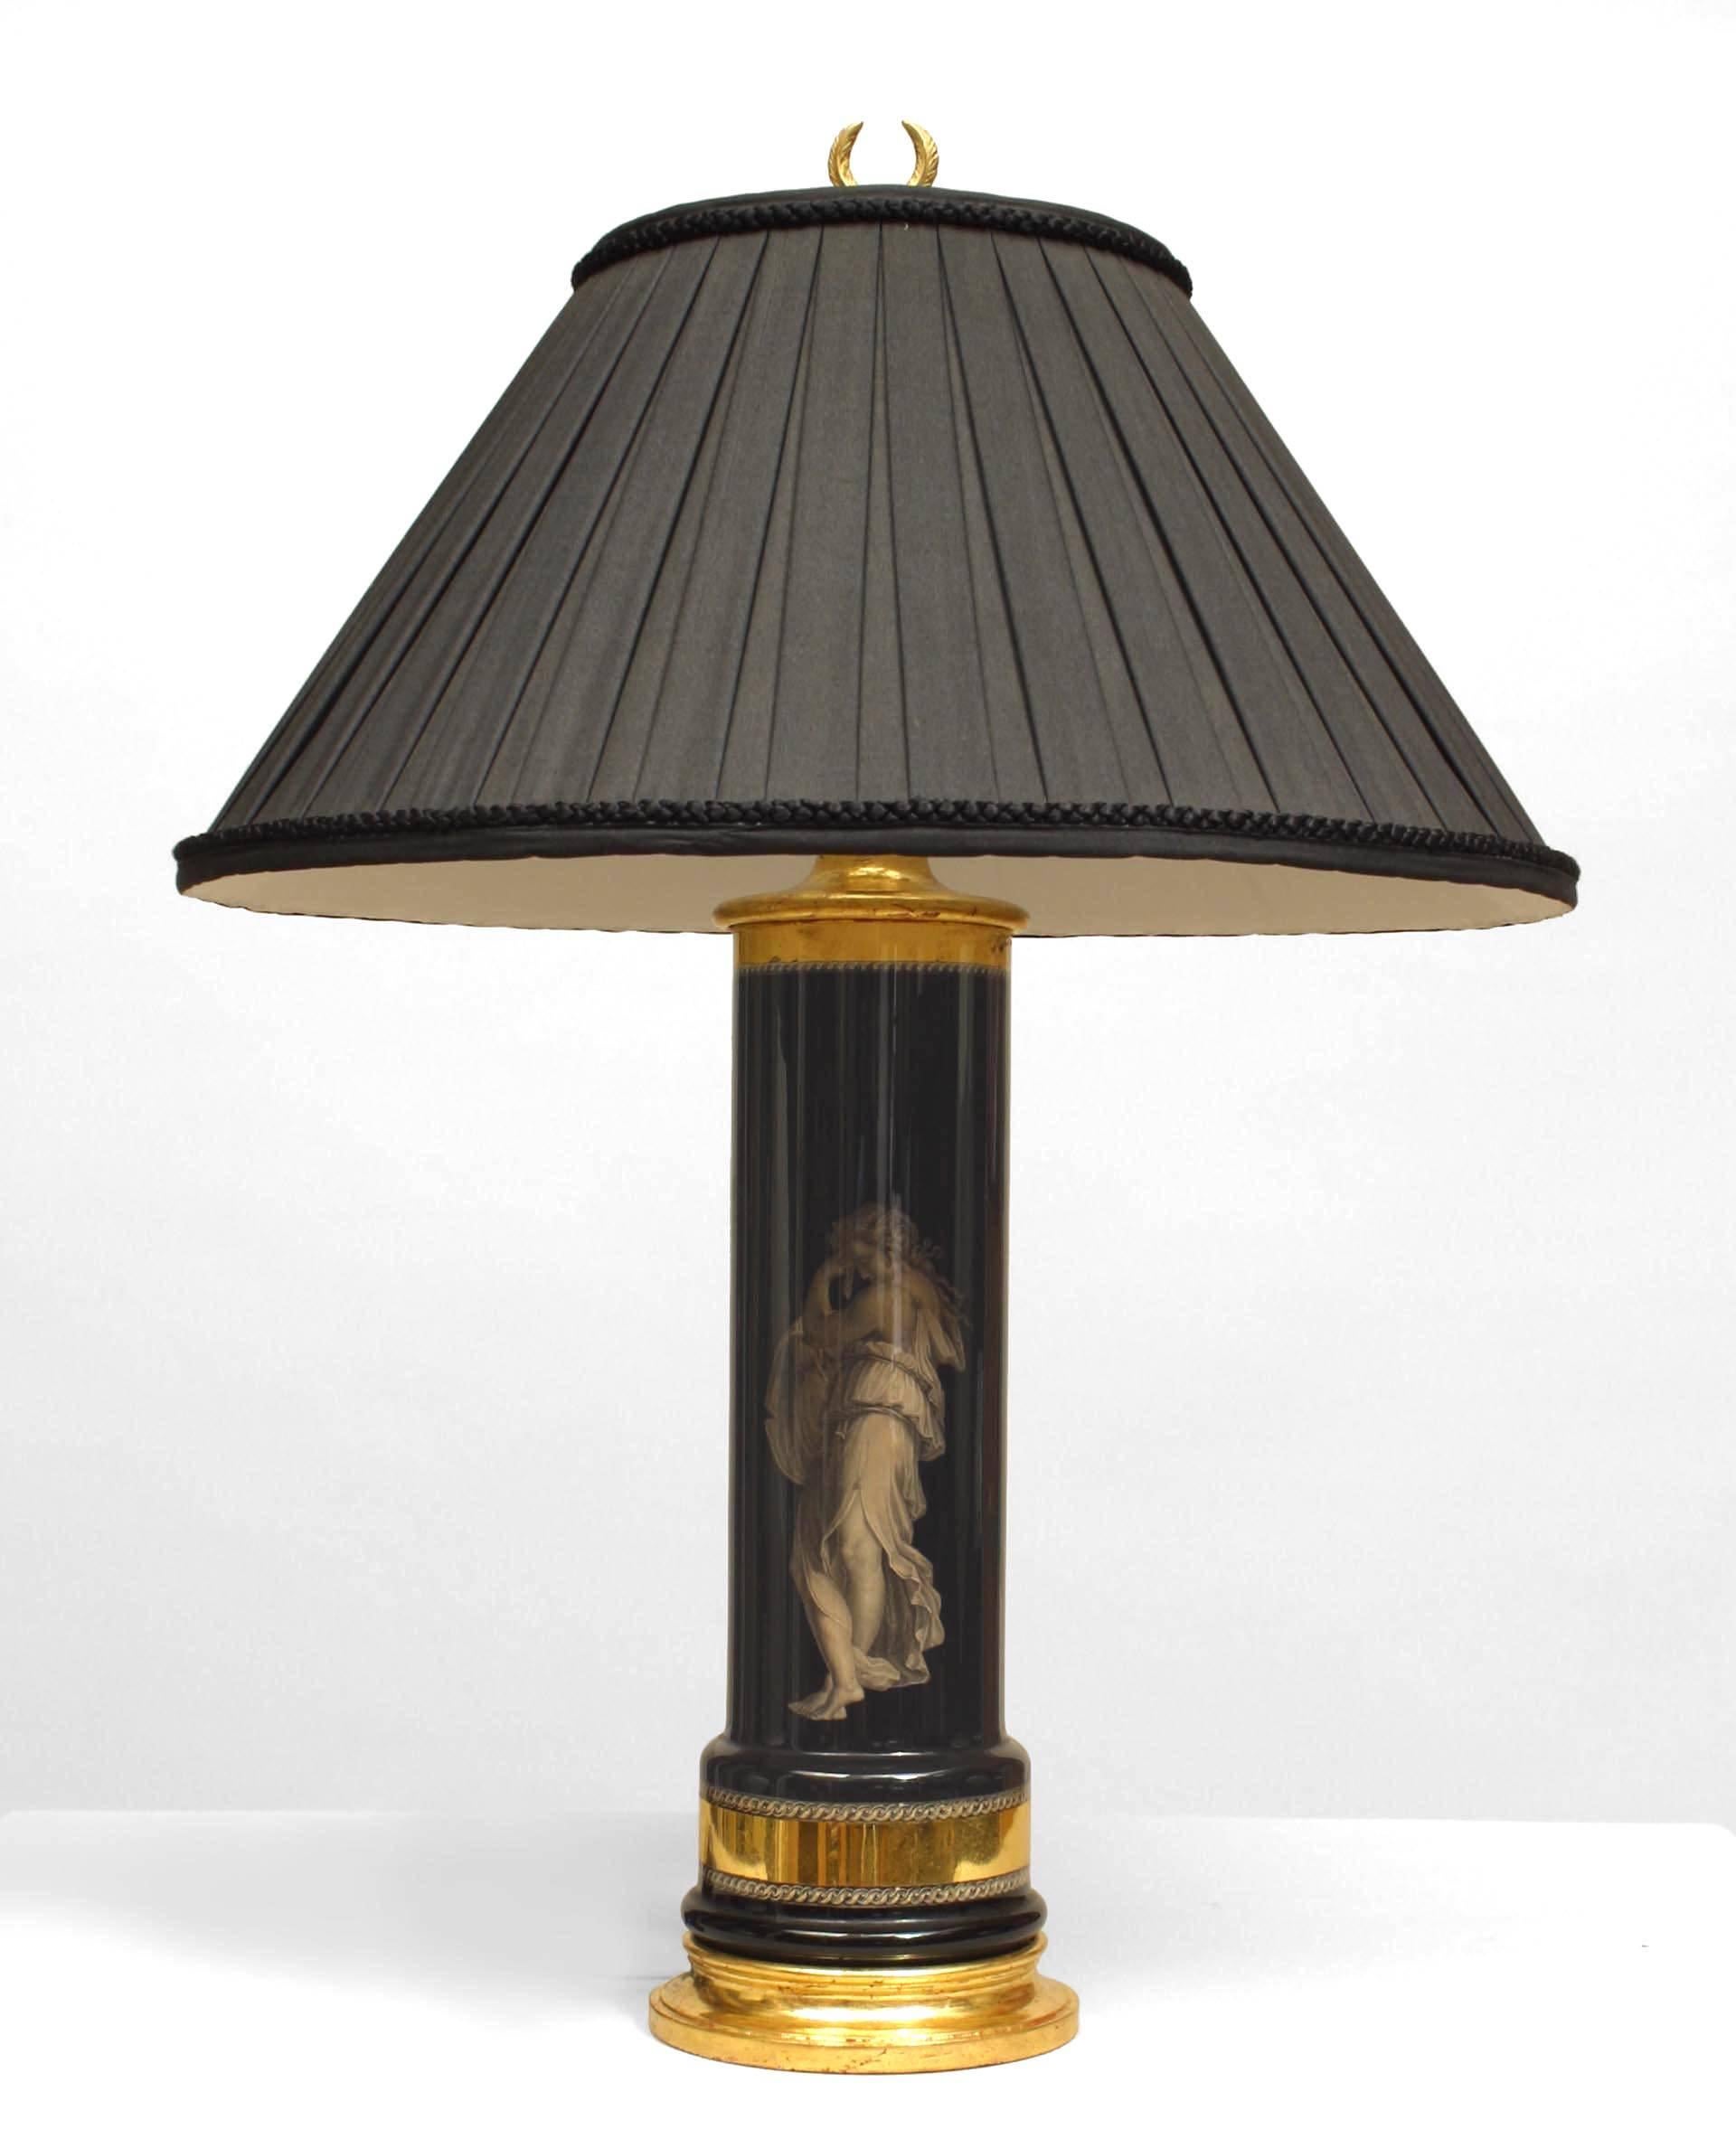 Pair of Italian 1940/50s black cylindrical √©glomis√© glass table lamps with classical figures of a man and lady on a round gilt wood base (PRICED AS Pair)
